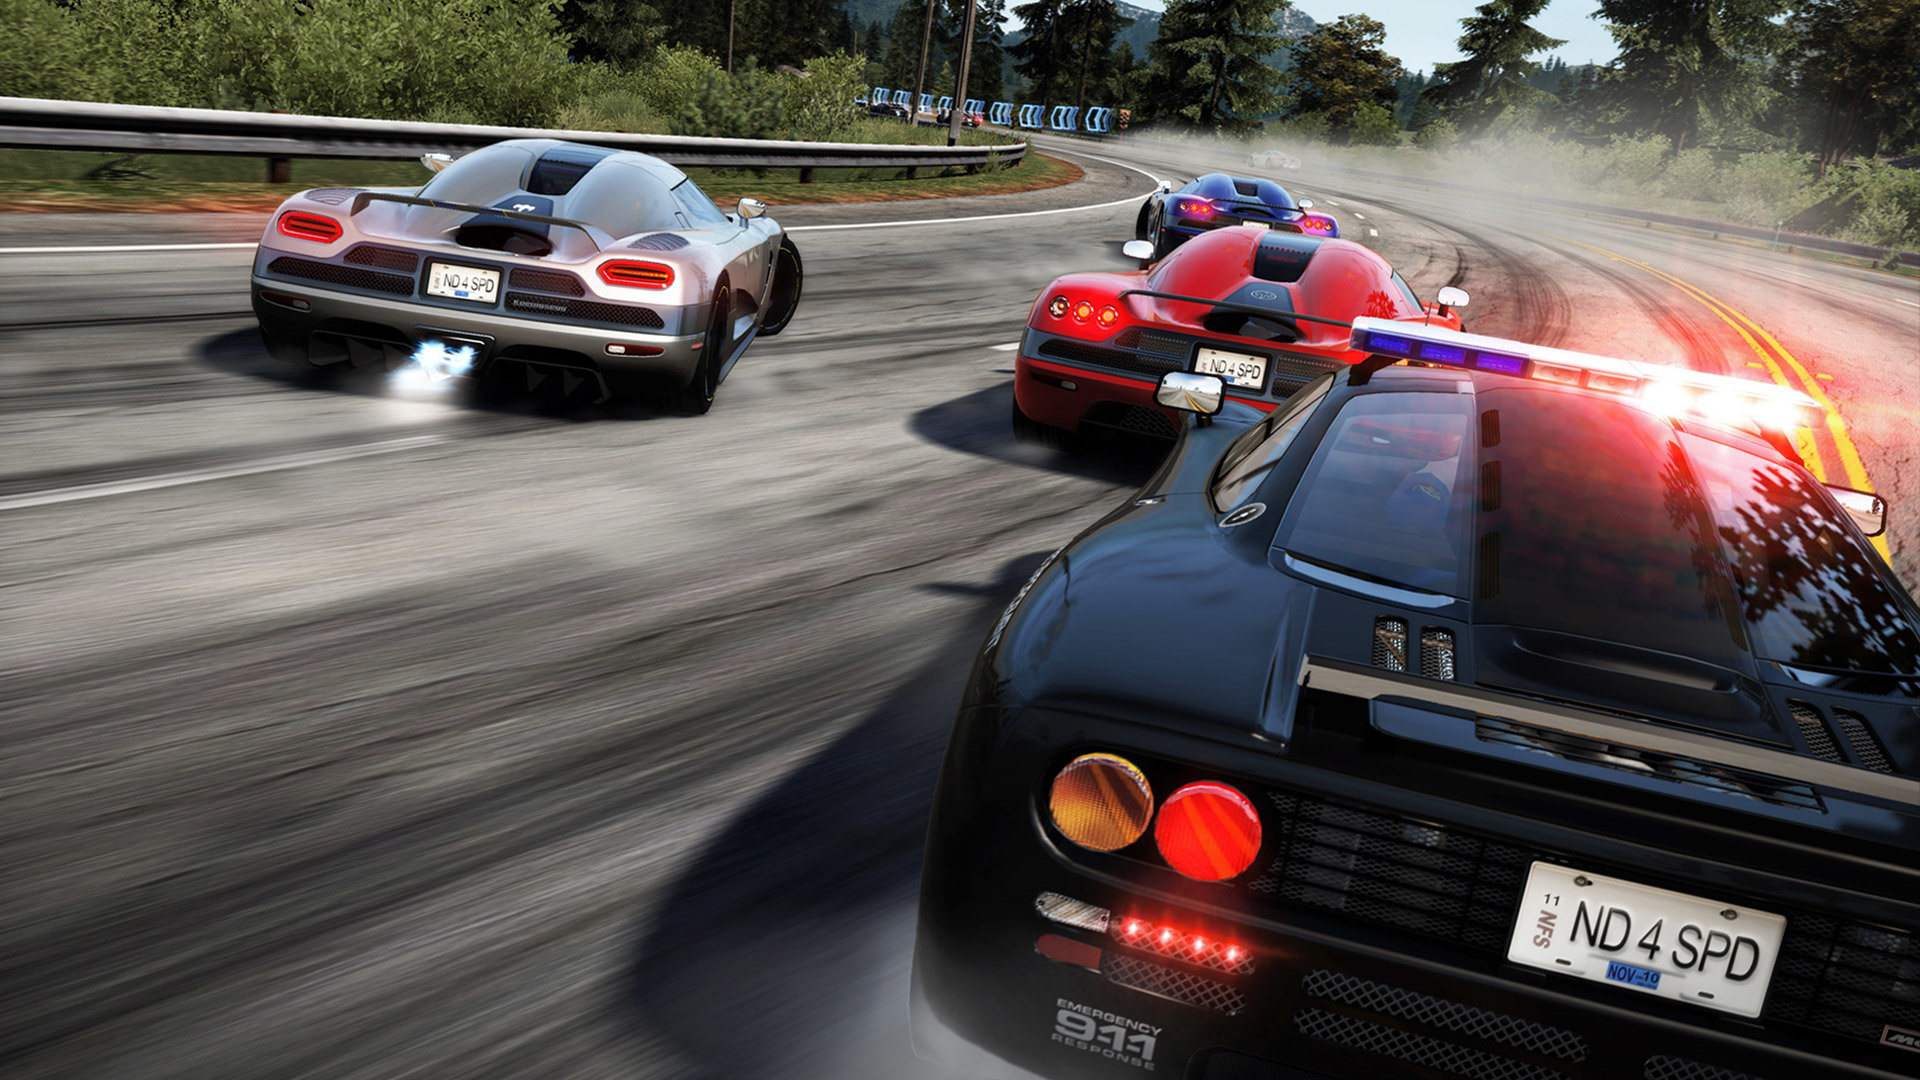 Awesome Need For Speed: Hot Pursuit free wallpaper ID:256243 for full hd 1920x1080 desktop